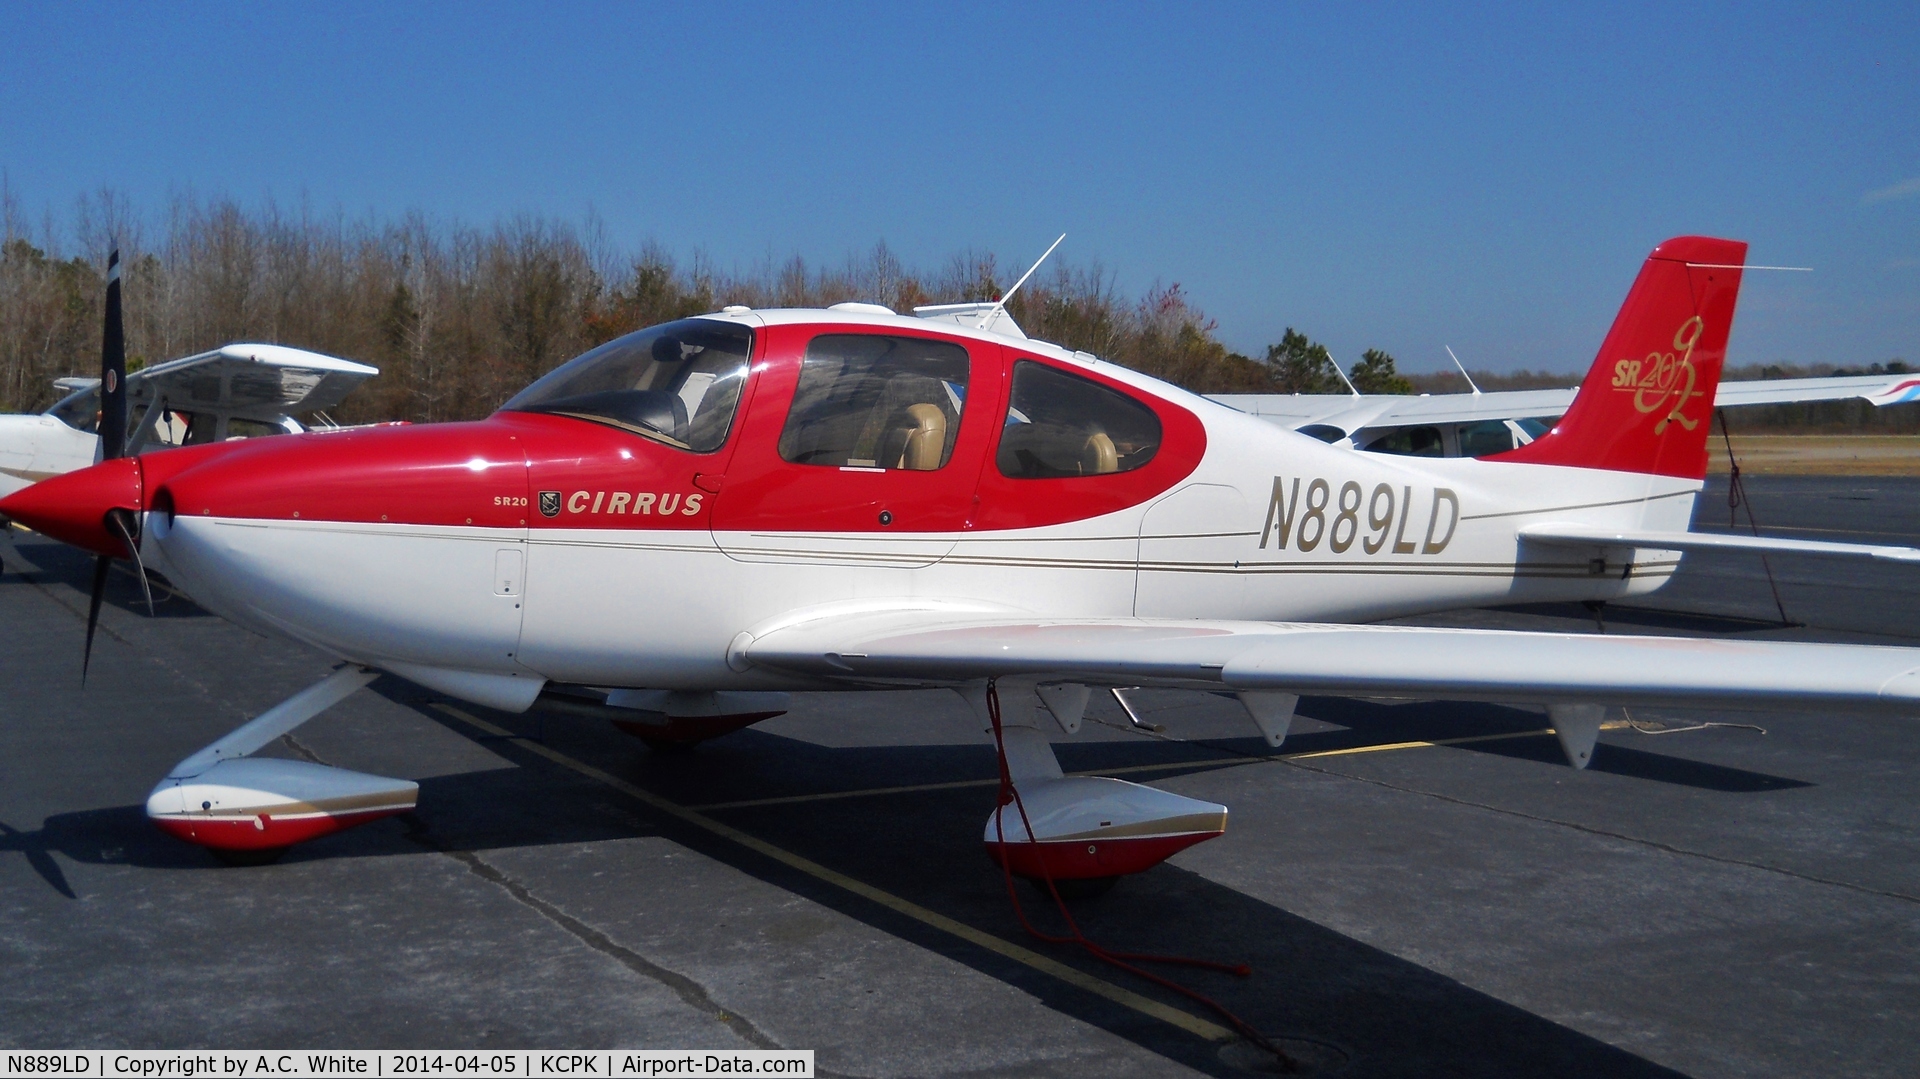 N889LD, 2004 Cirrus SR20 C/N 1434, Cirrus 9LD parked in front of Epix Aviation at Chesapeake.